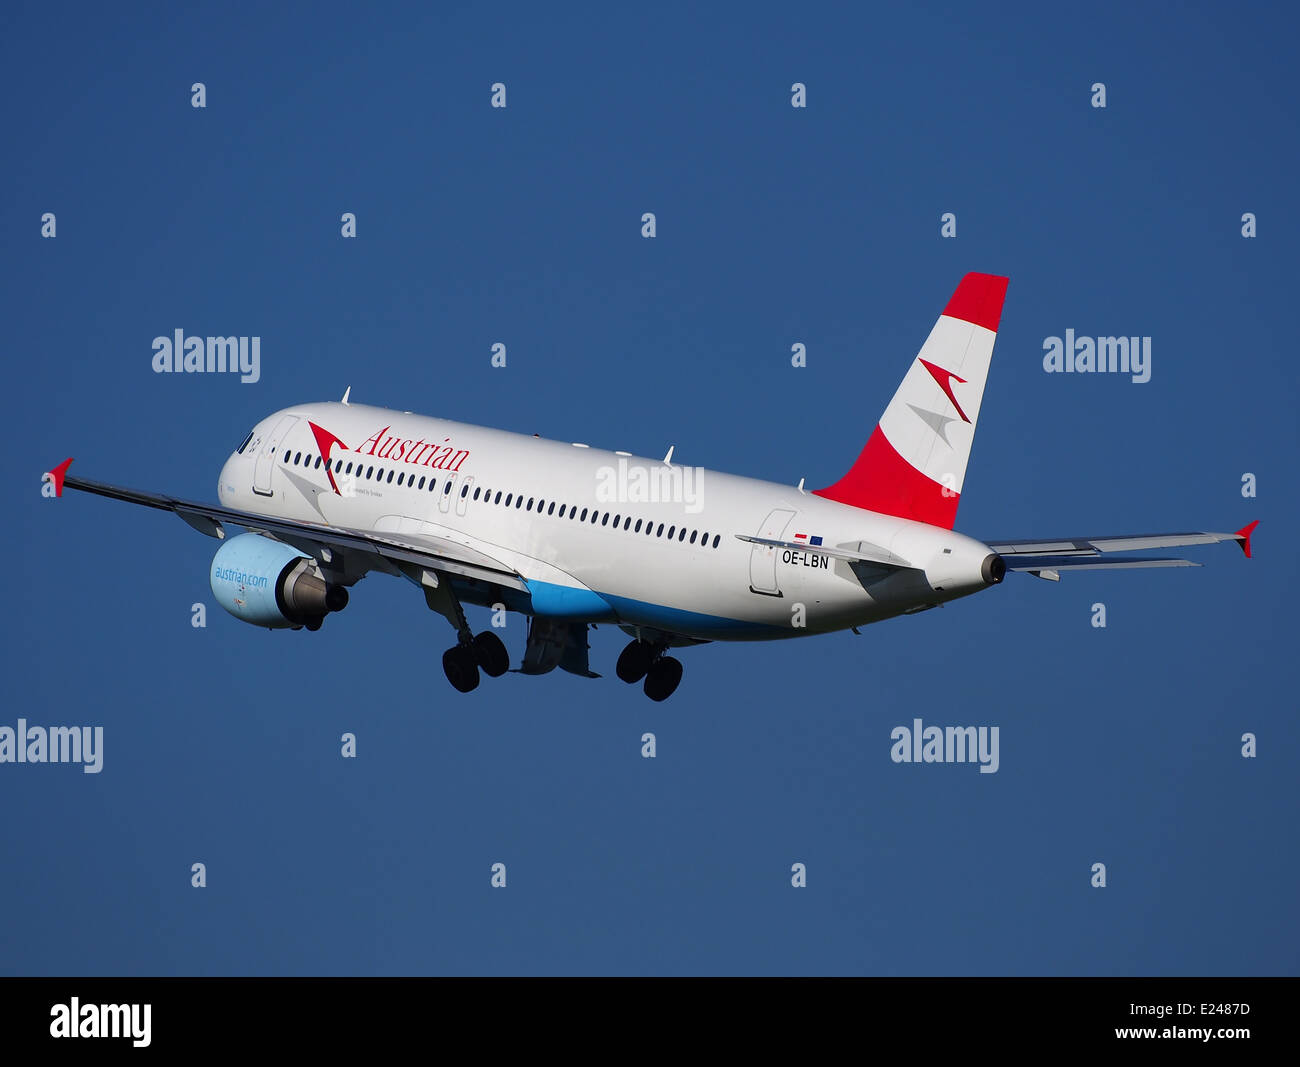 OE-LBN Austrian Airlines Airbus A320-214 - cn 768 takeoff from Schiphol (AMS - EHAM), The Netherlands, 16may2014, pic-4 Stock Photo